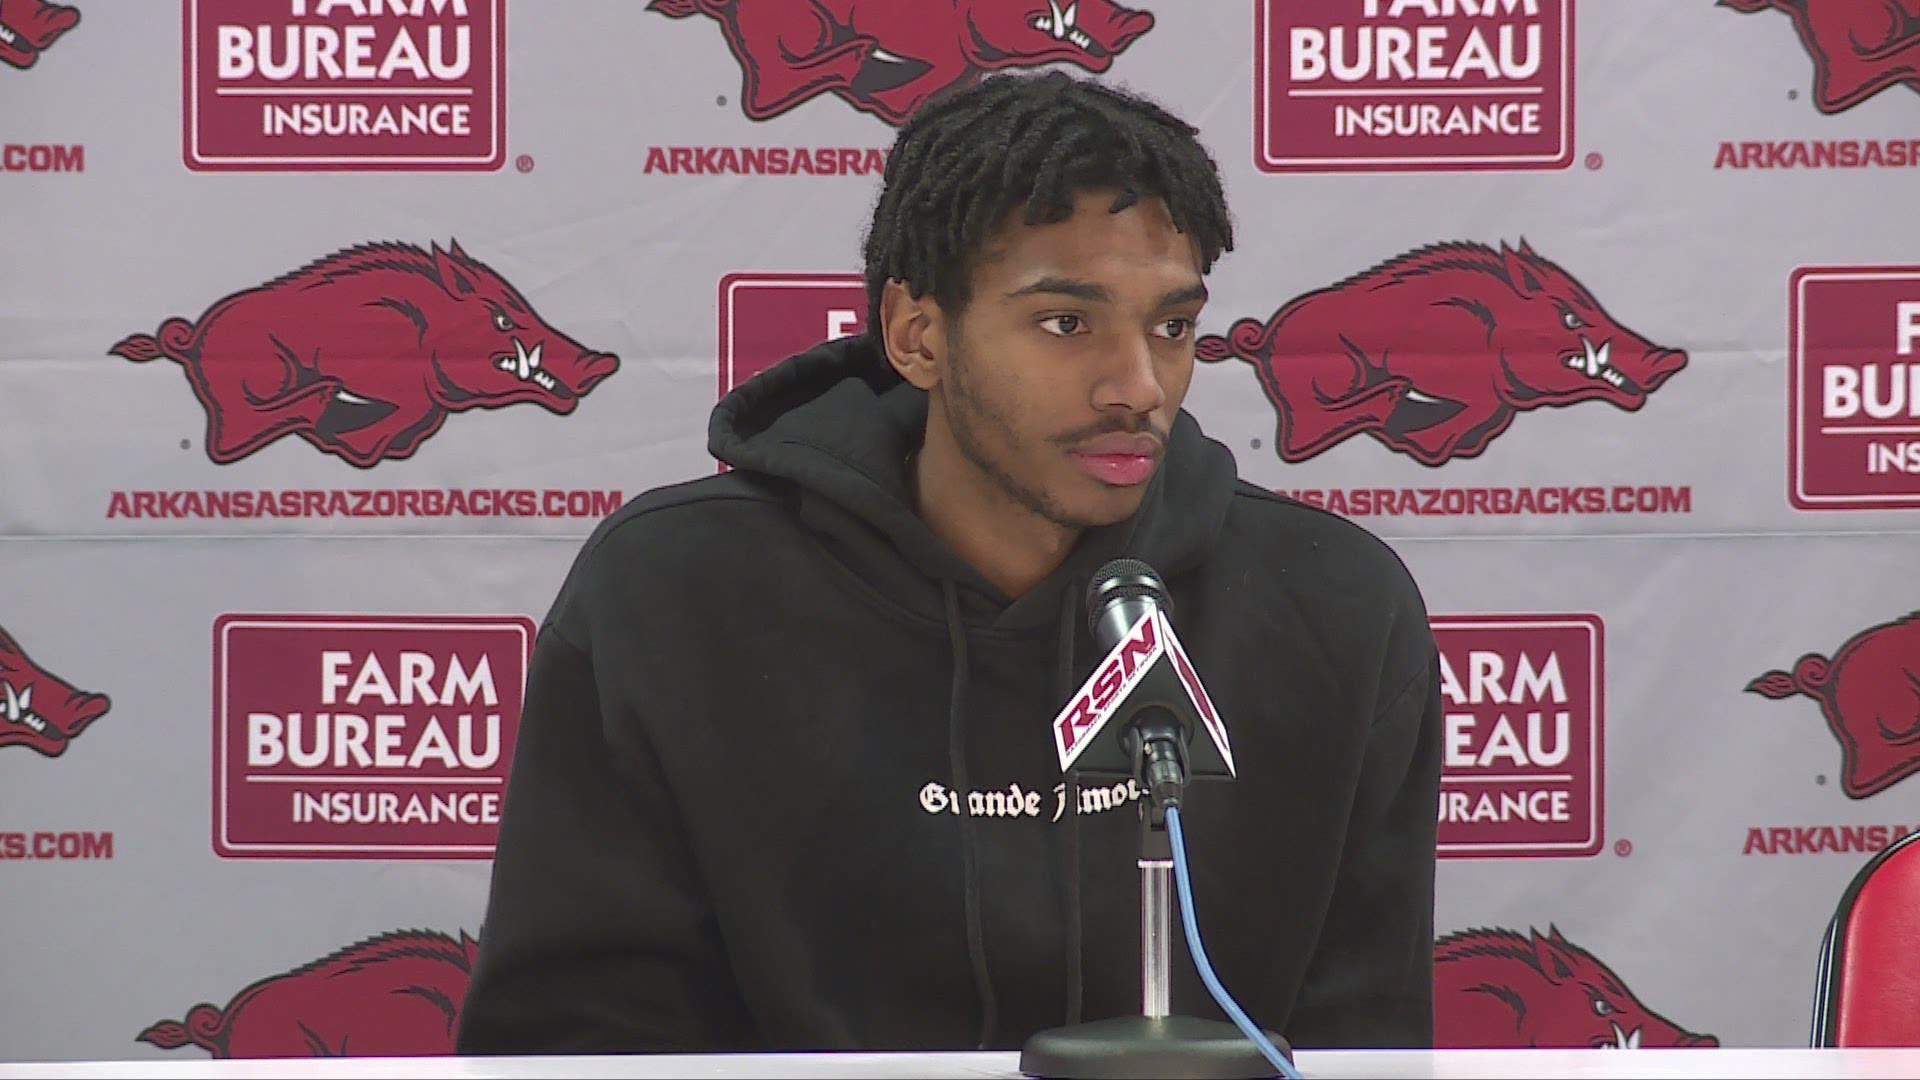 The Razorbacks' senior guard said that Saturday's matchup against the Horned Frogs is a make or break moment in the season.